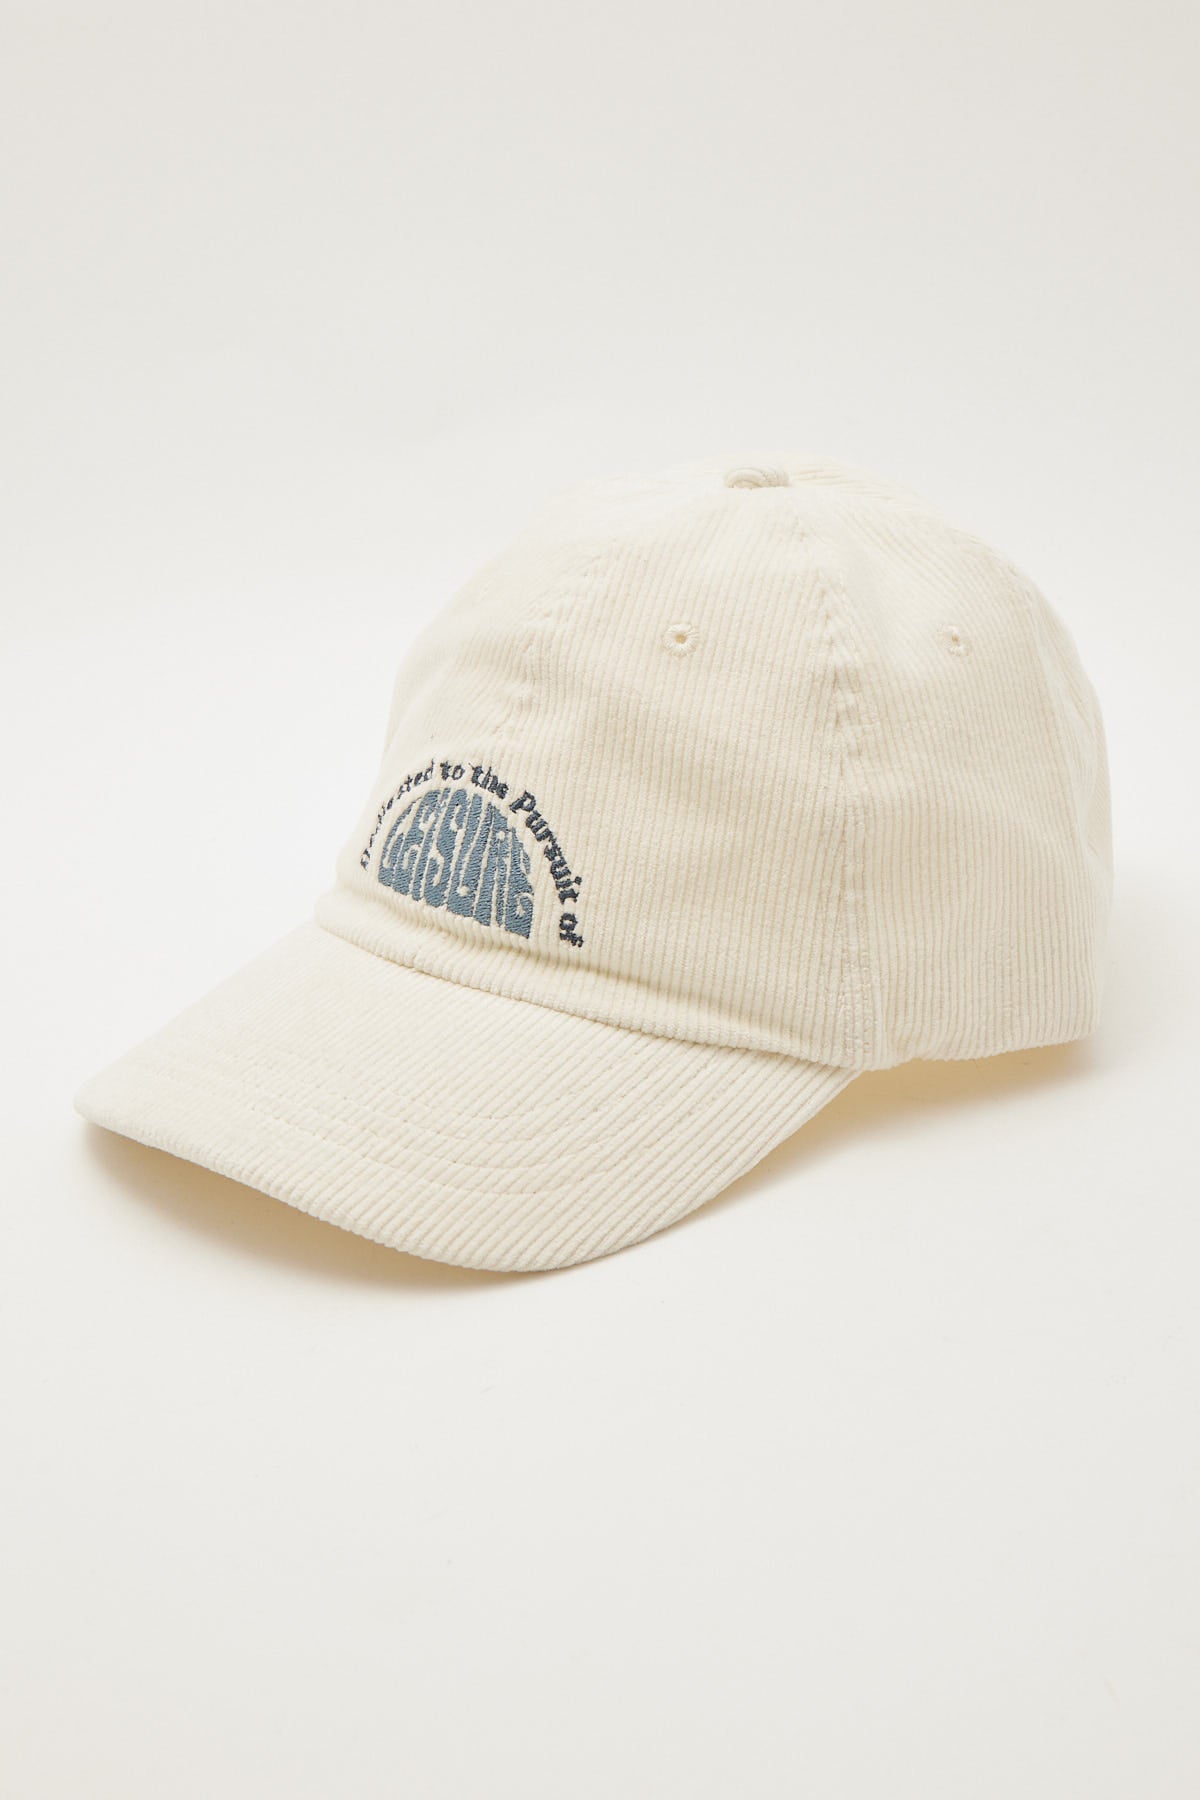 Common Need Pursuit Of Leisure Dad Cap Off White